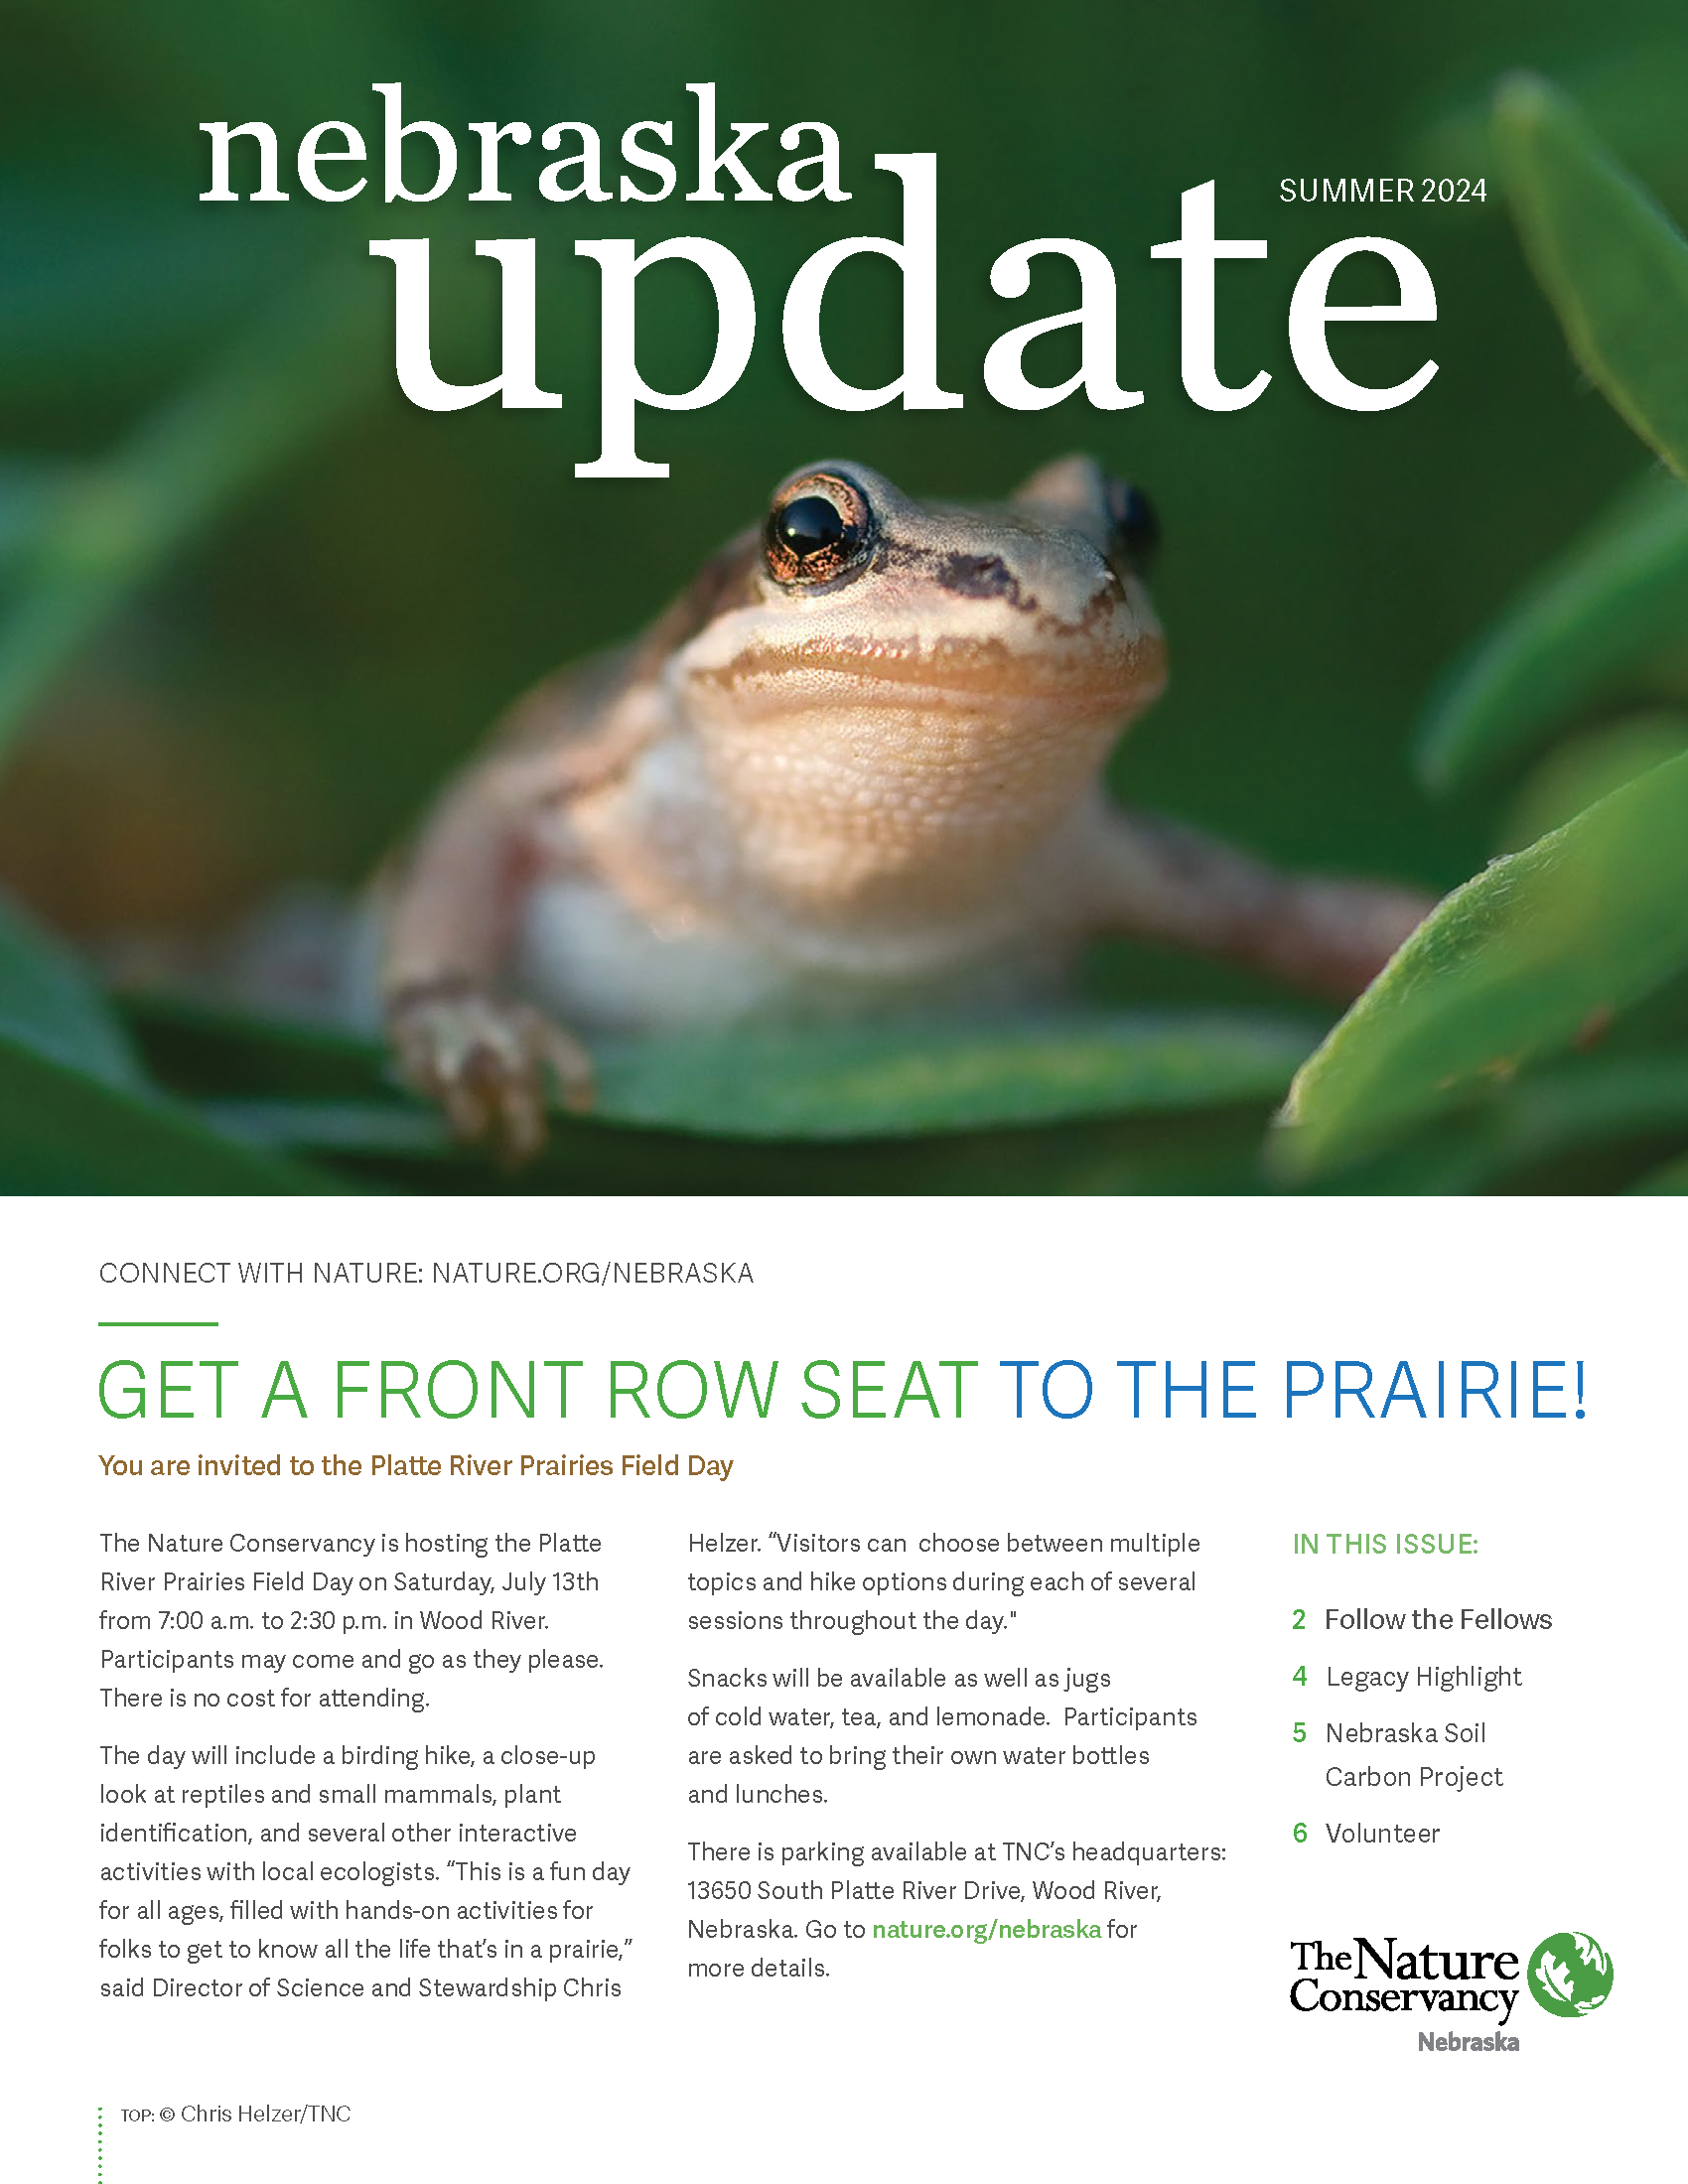 Check out the latest information from The Nature Conservancy in Nebraska!